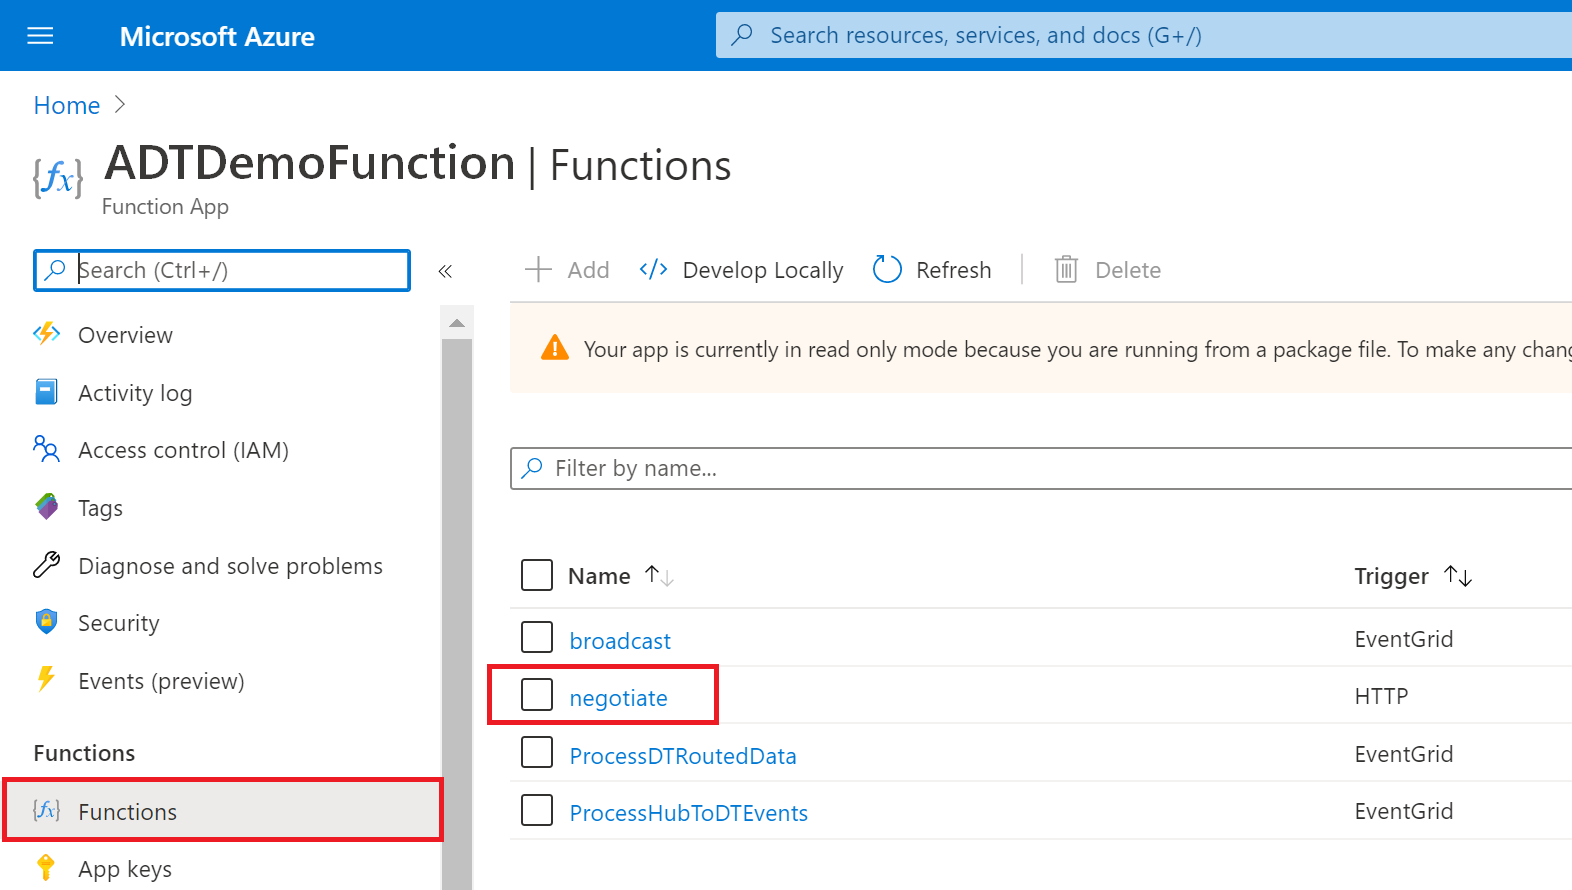 Screenshot of the Azure portal function apps, with 'Functions' highlighted in the menu and 'negotiate' highlighted in the list of functions.